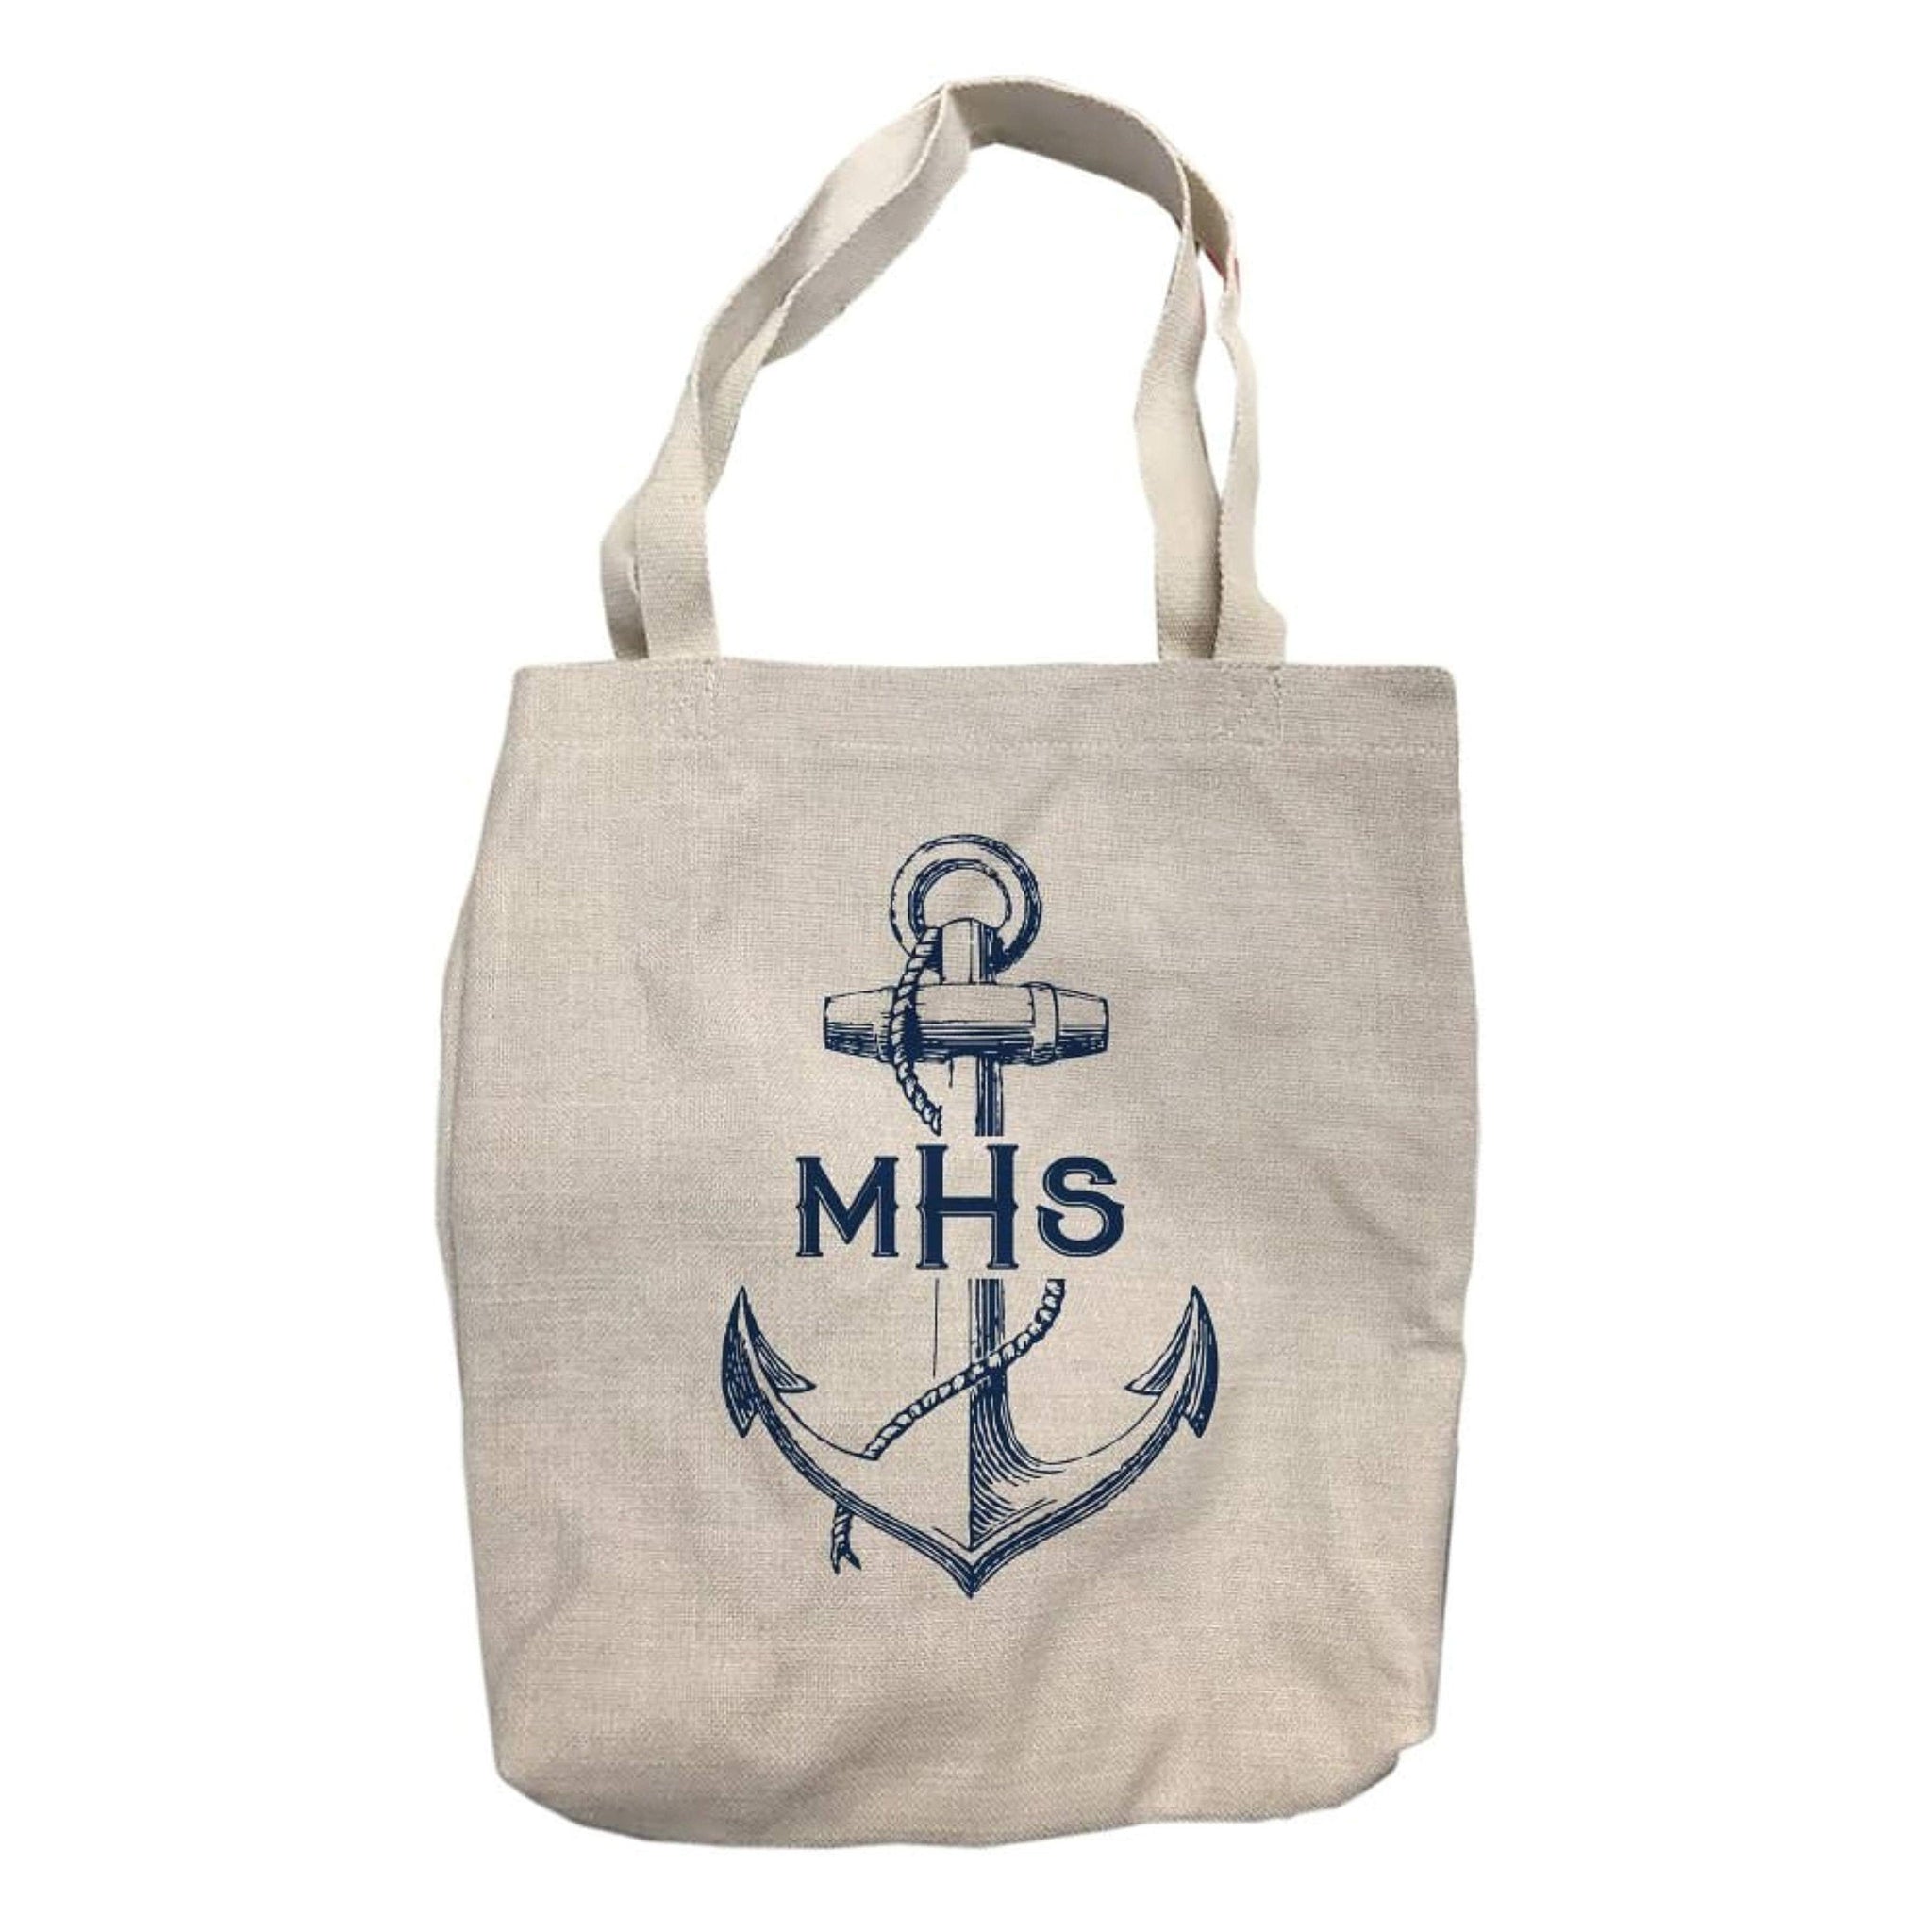 Personalized Nautical Anchor Tote Bag with Monogram